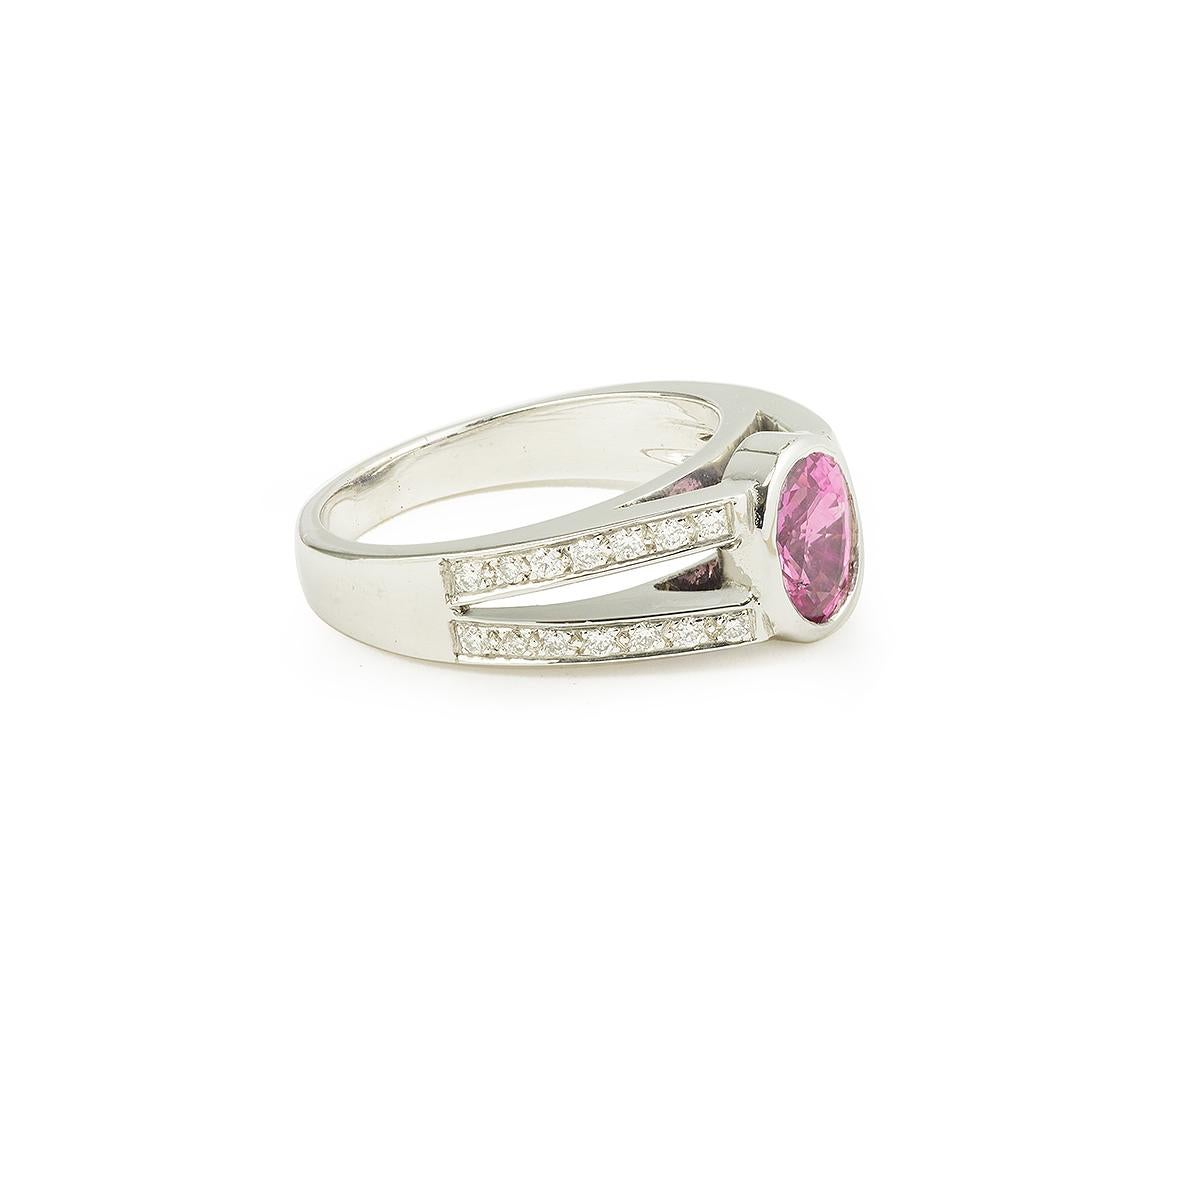 Beautiful ring set with a central oval pink sapphire with diamonds on each sides.
18 carat white gold 750 / 1000th  (eagles' head hallmark)

Weight of pink sapphire: 1.65 carats

Color: intense pink
Features: Very slightly heated
Provenance: